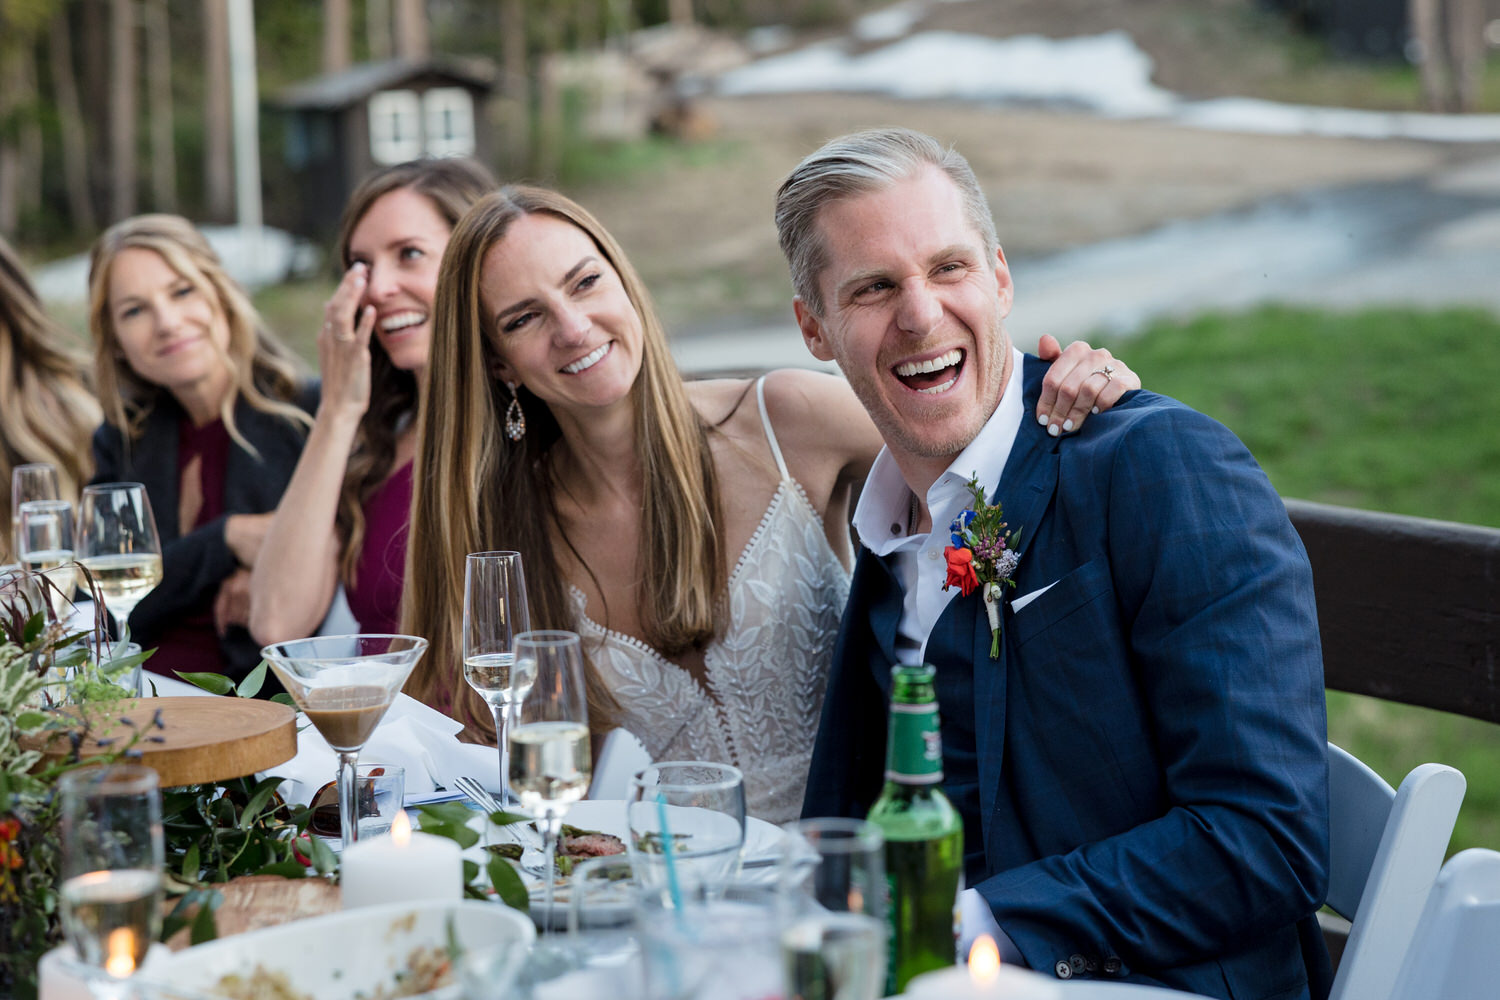 The bride and groom react to a funny champagne toast at their outdoor ski resort wedding.